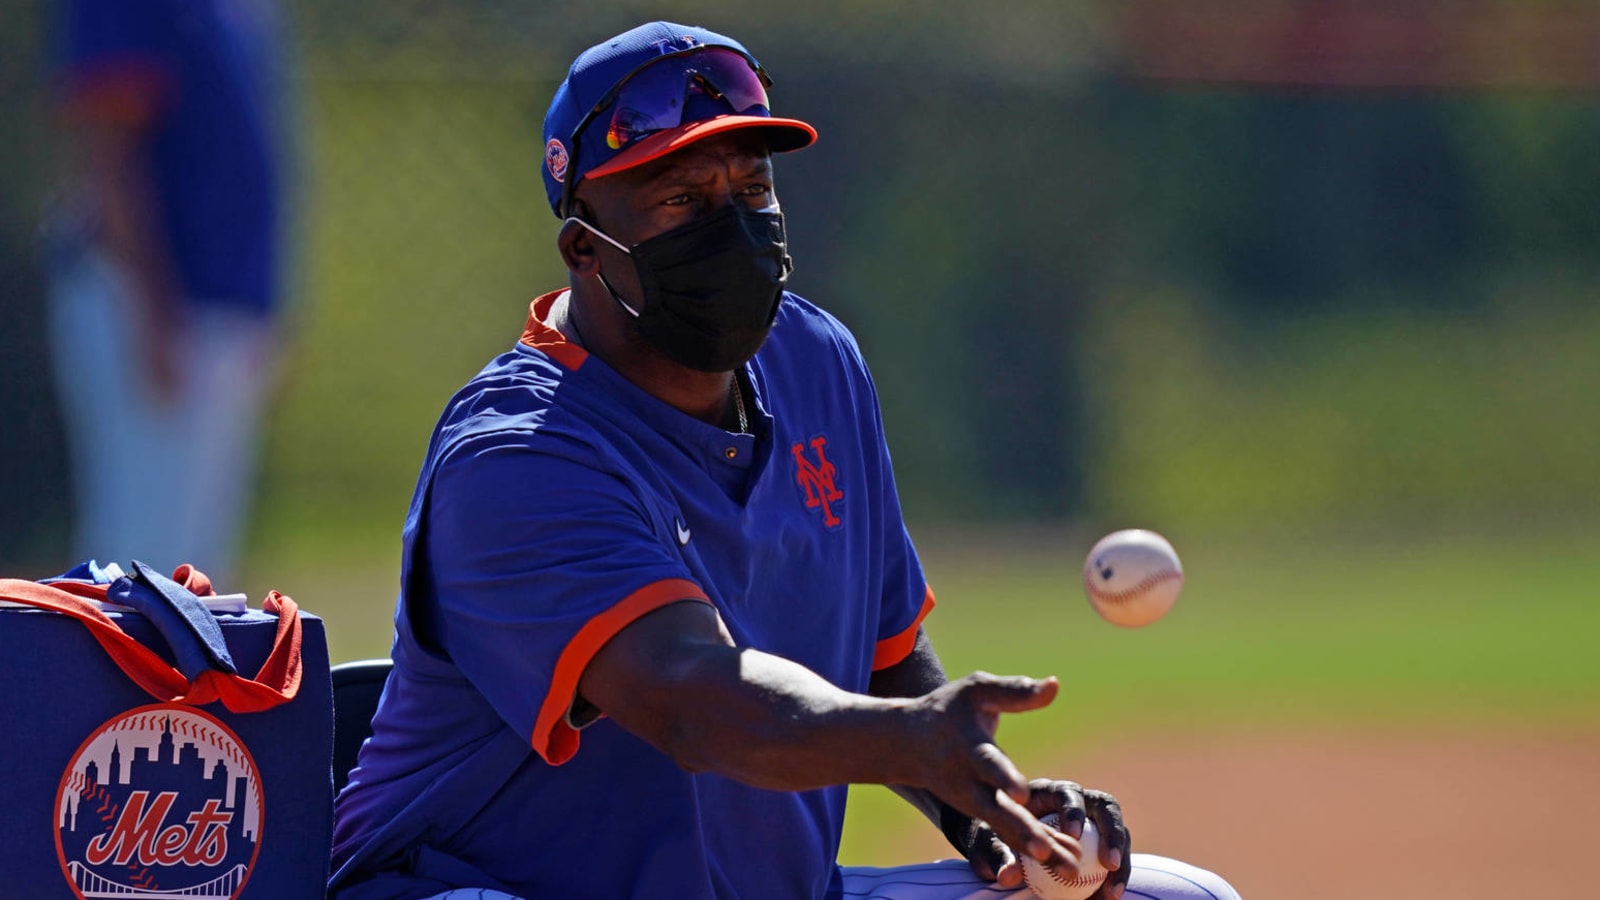 Chili Davis blasts Mets after being fired as hitting coach